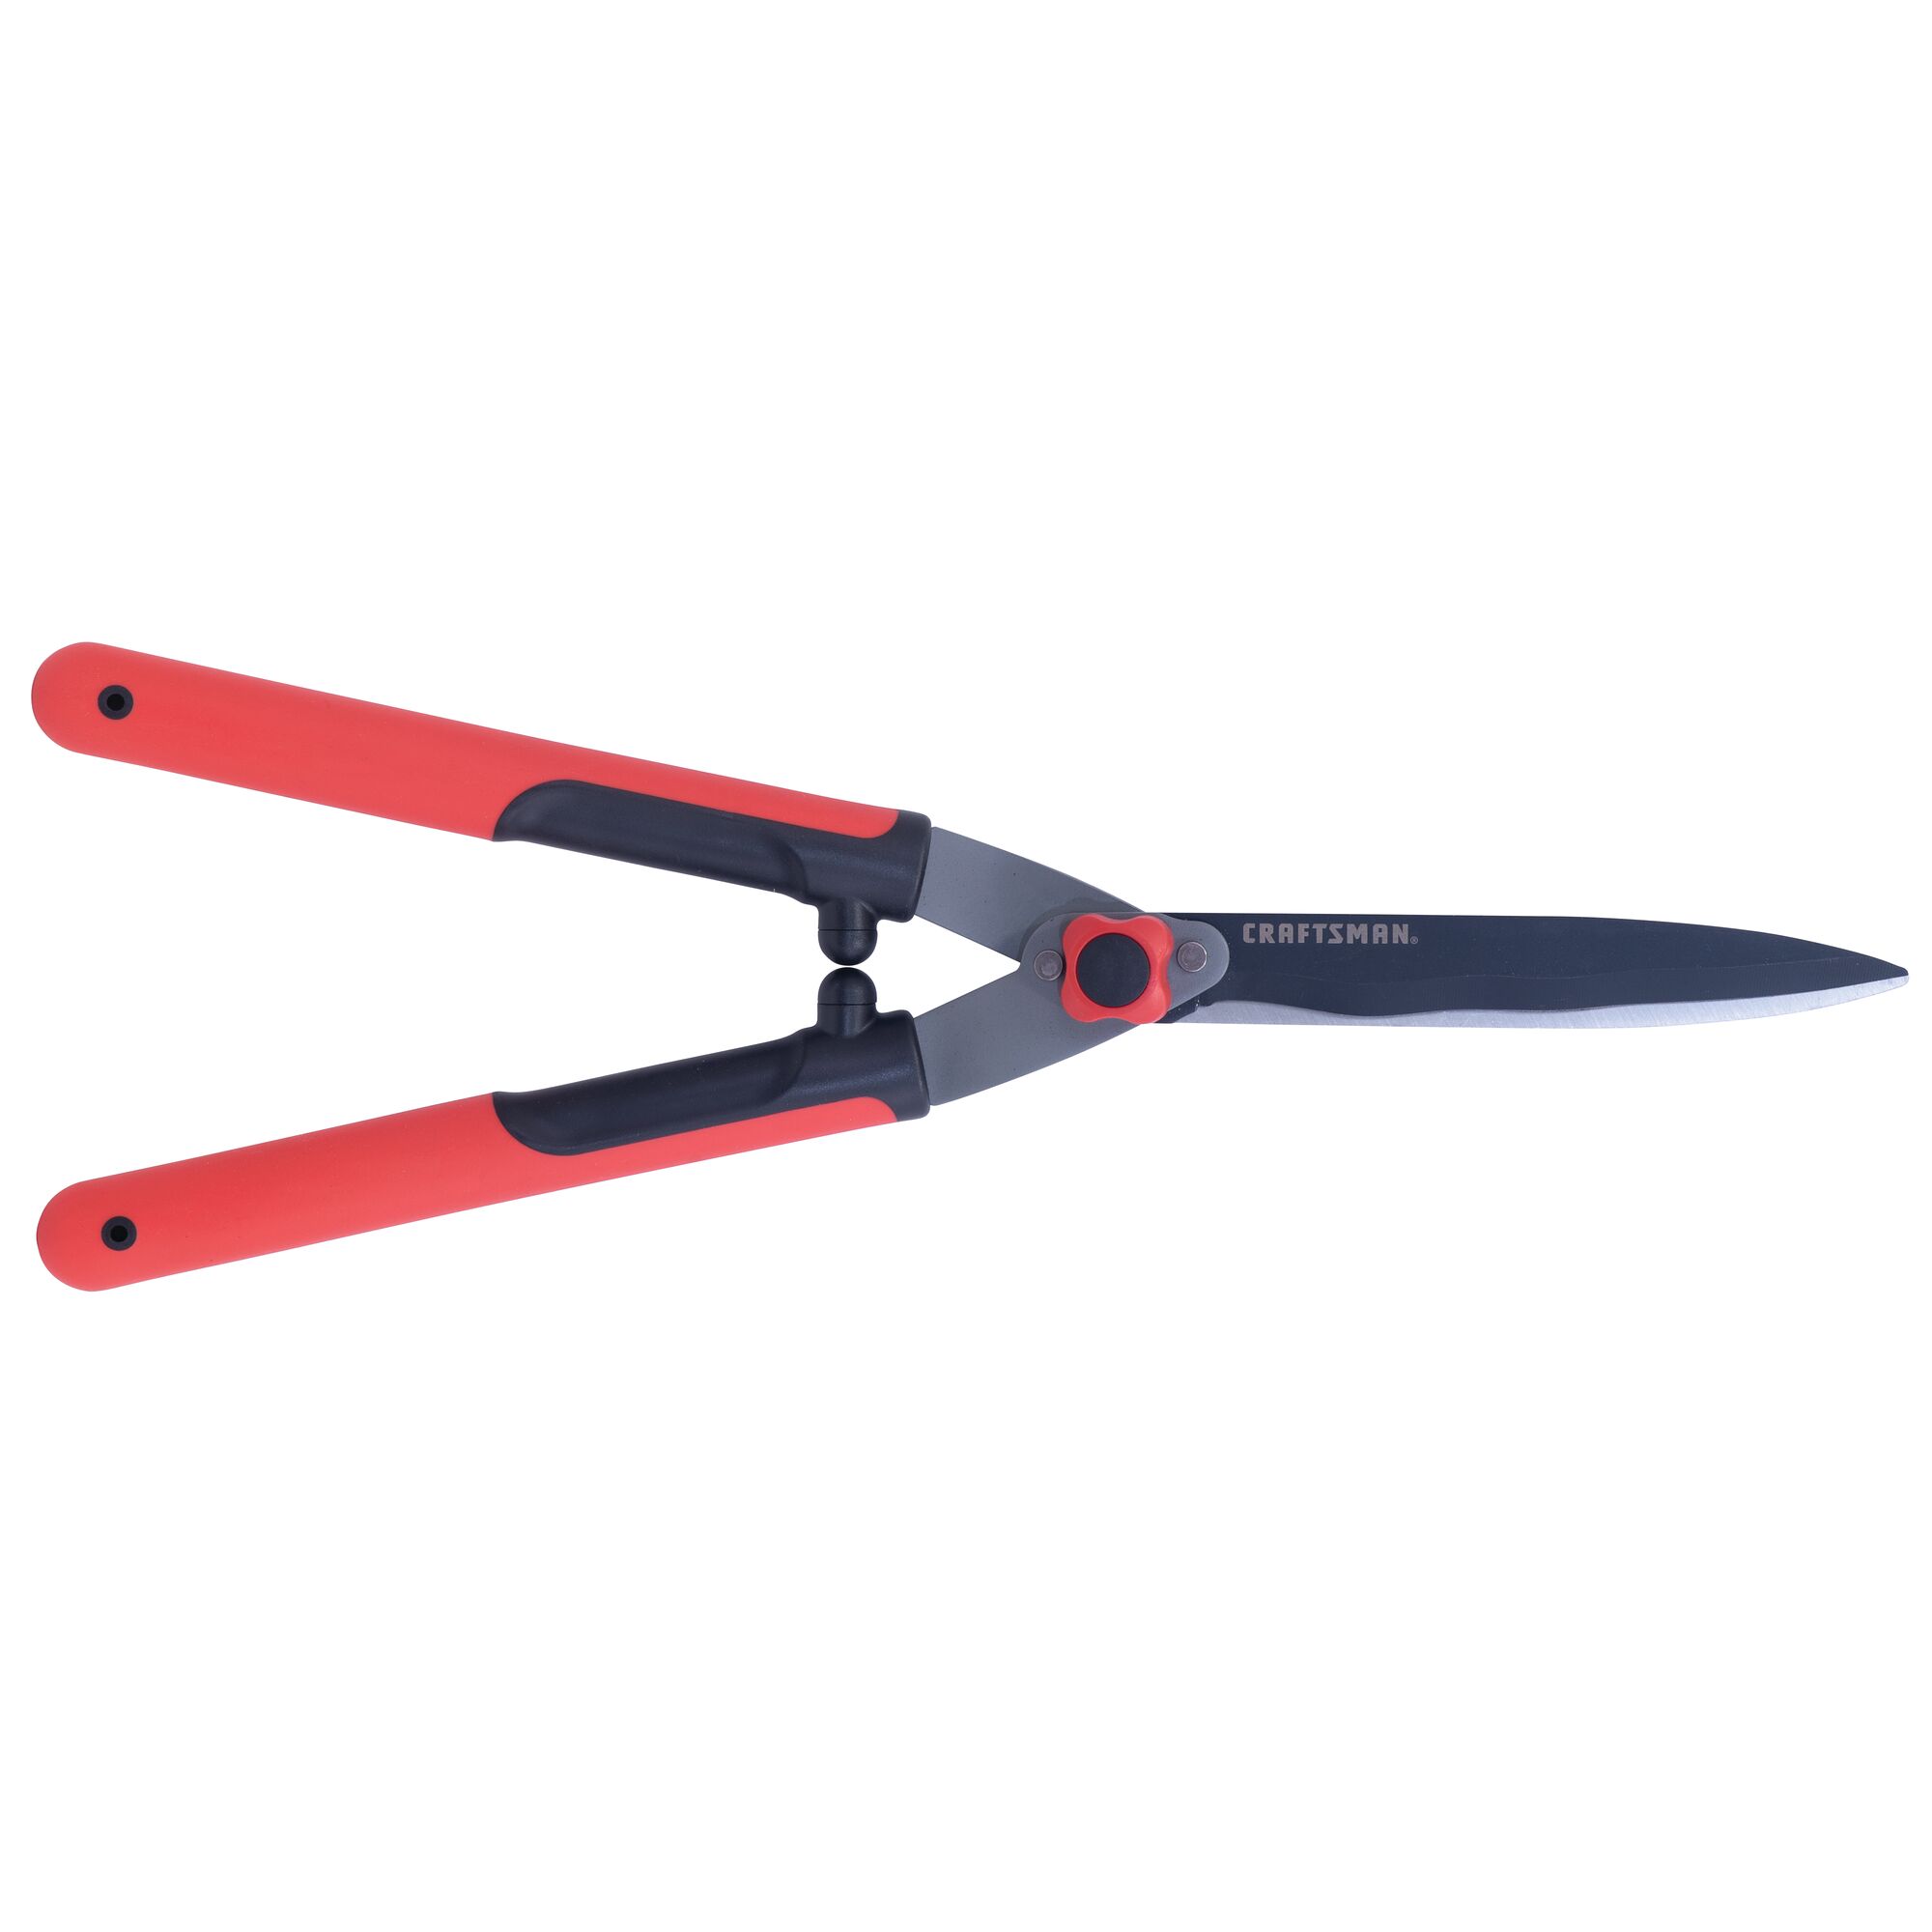 Hedge shears with closed blades.